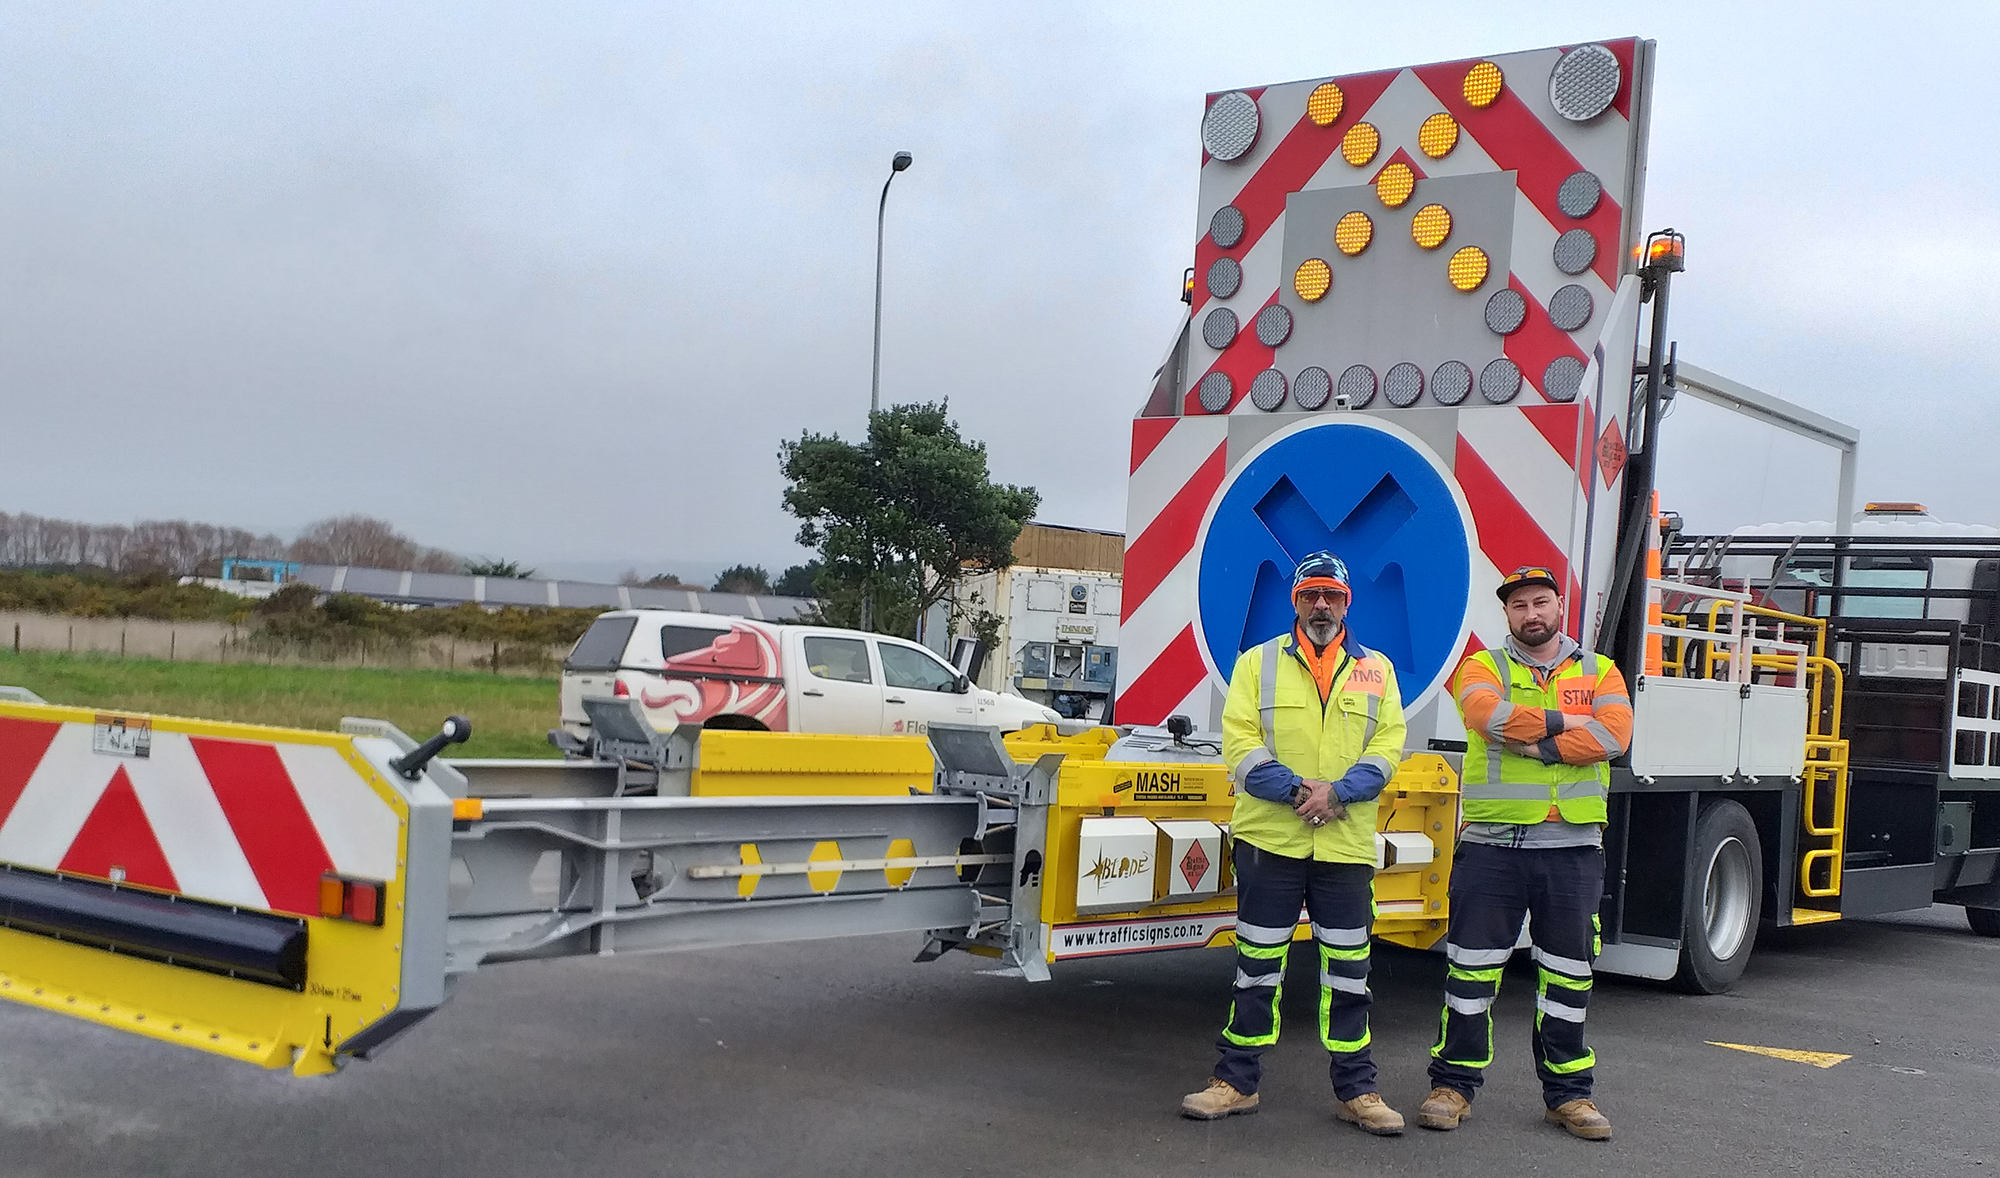 Truck with trailer on the back with illuminated traffic management signals and two men standing with yellow and orange high-vis gear on.